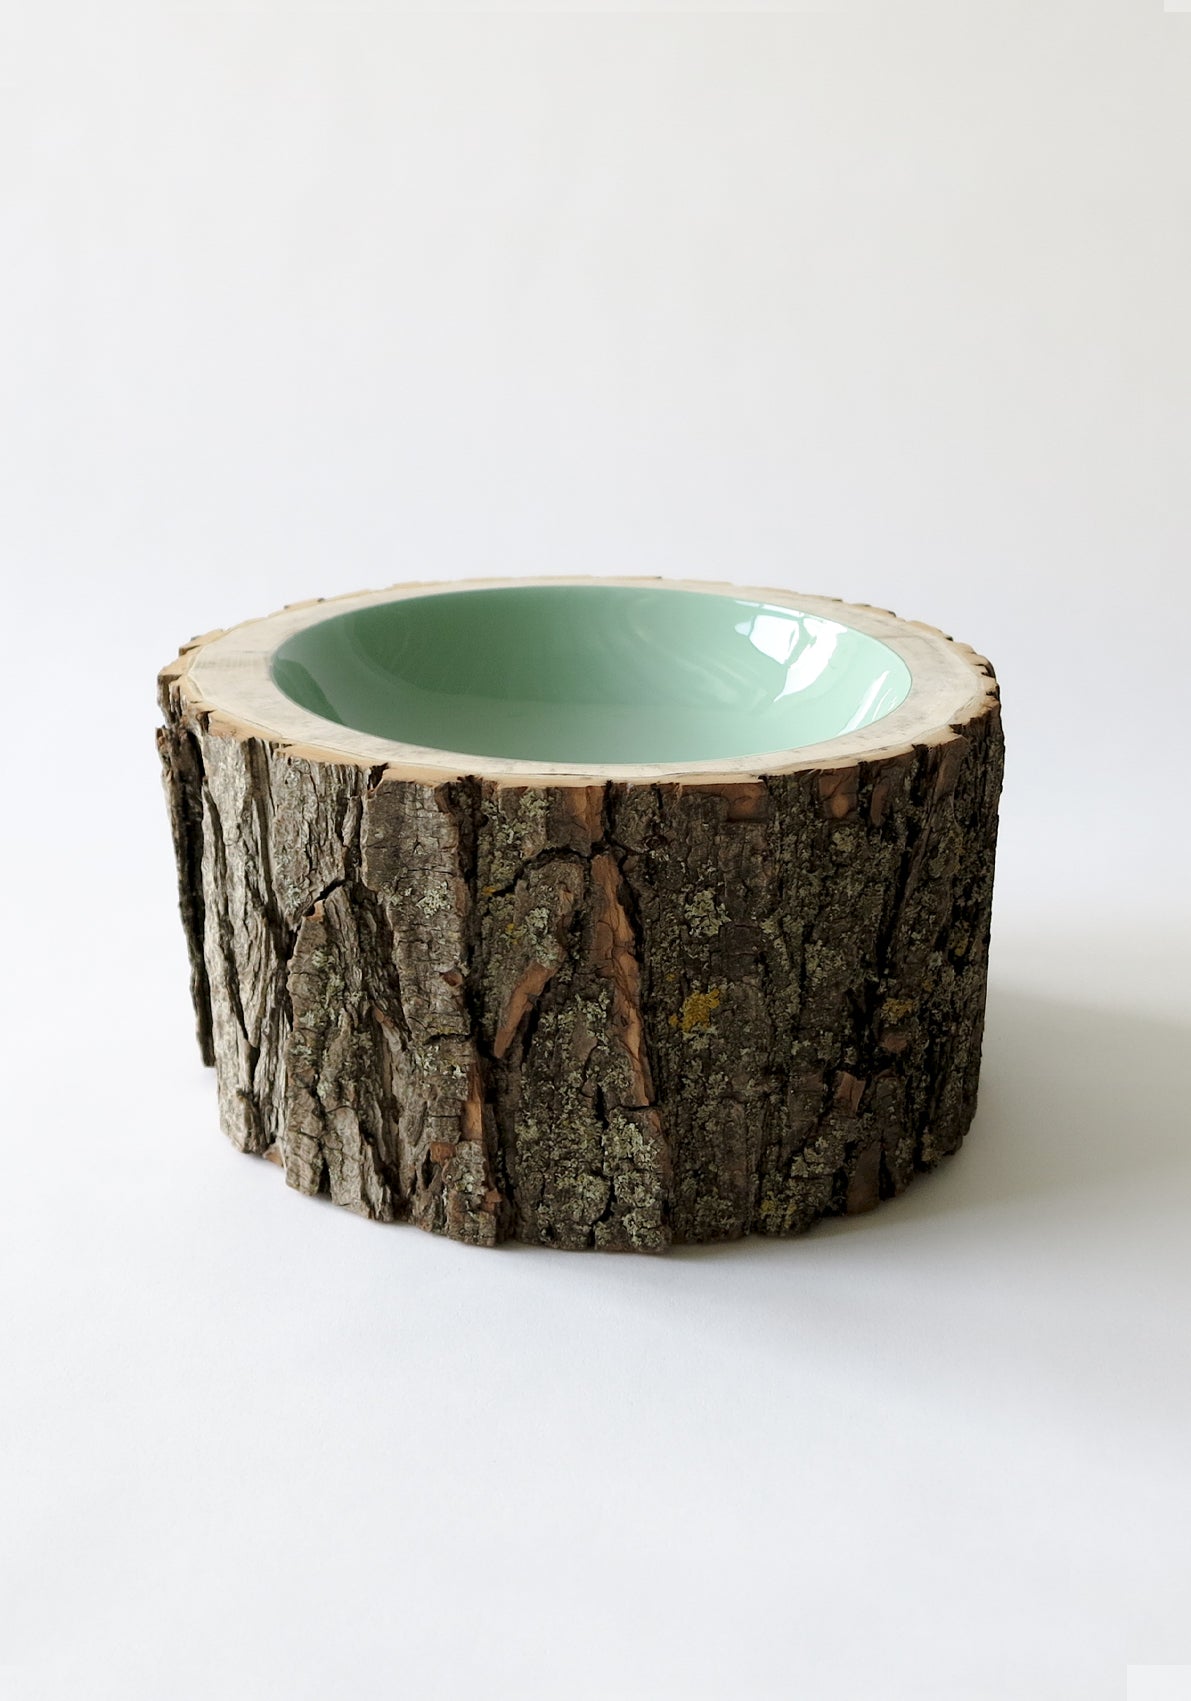 Size 10 Log Bowl - Large Wooden Bowl with rough bark, glossy interior is a pale sage blue/green..